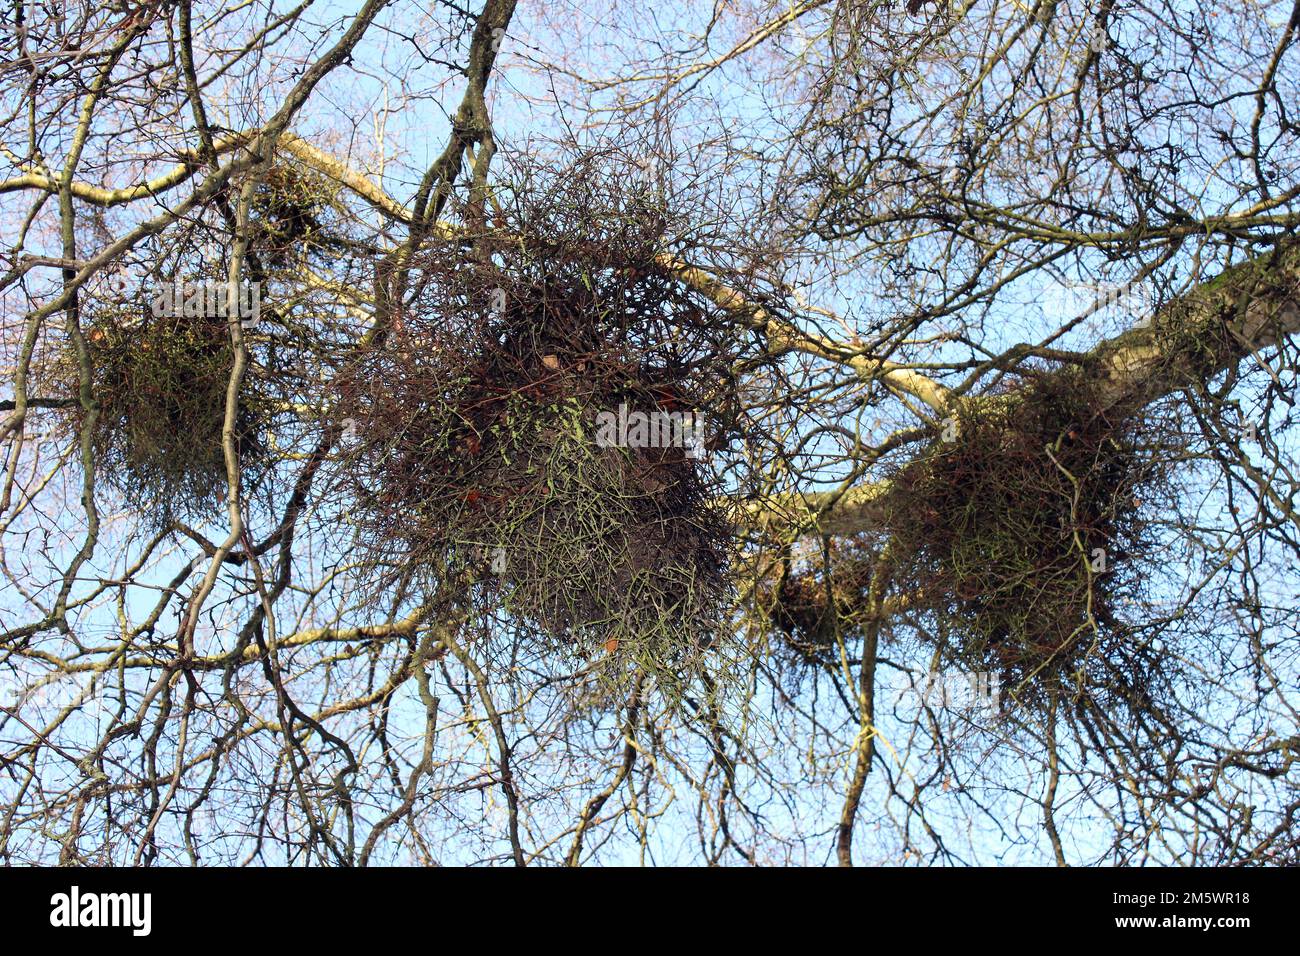 Witch's broom or witches' broom on Silver Birch Tree Betula pendula caused by the Fungus Taphrina betulina Stock Photo